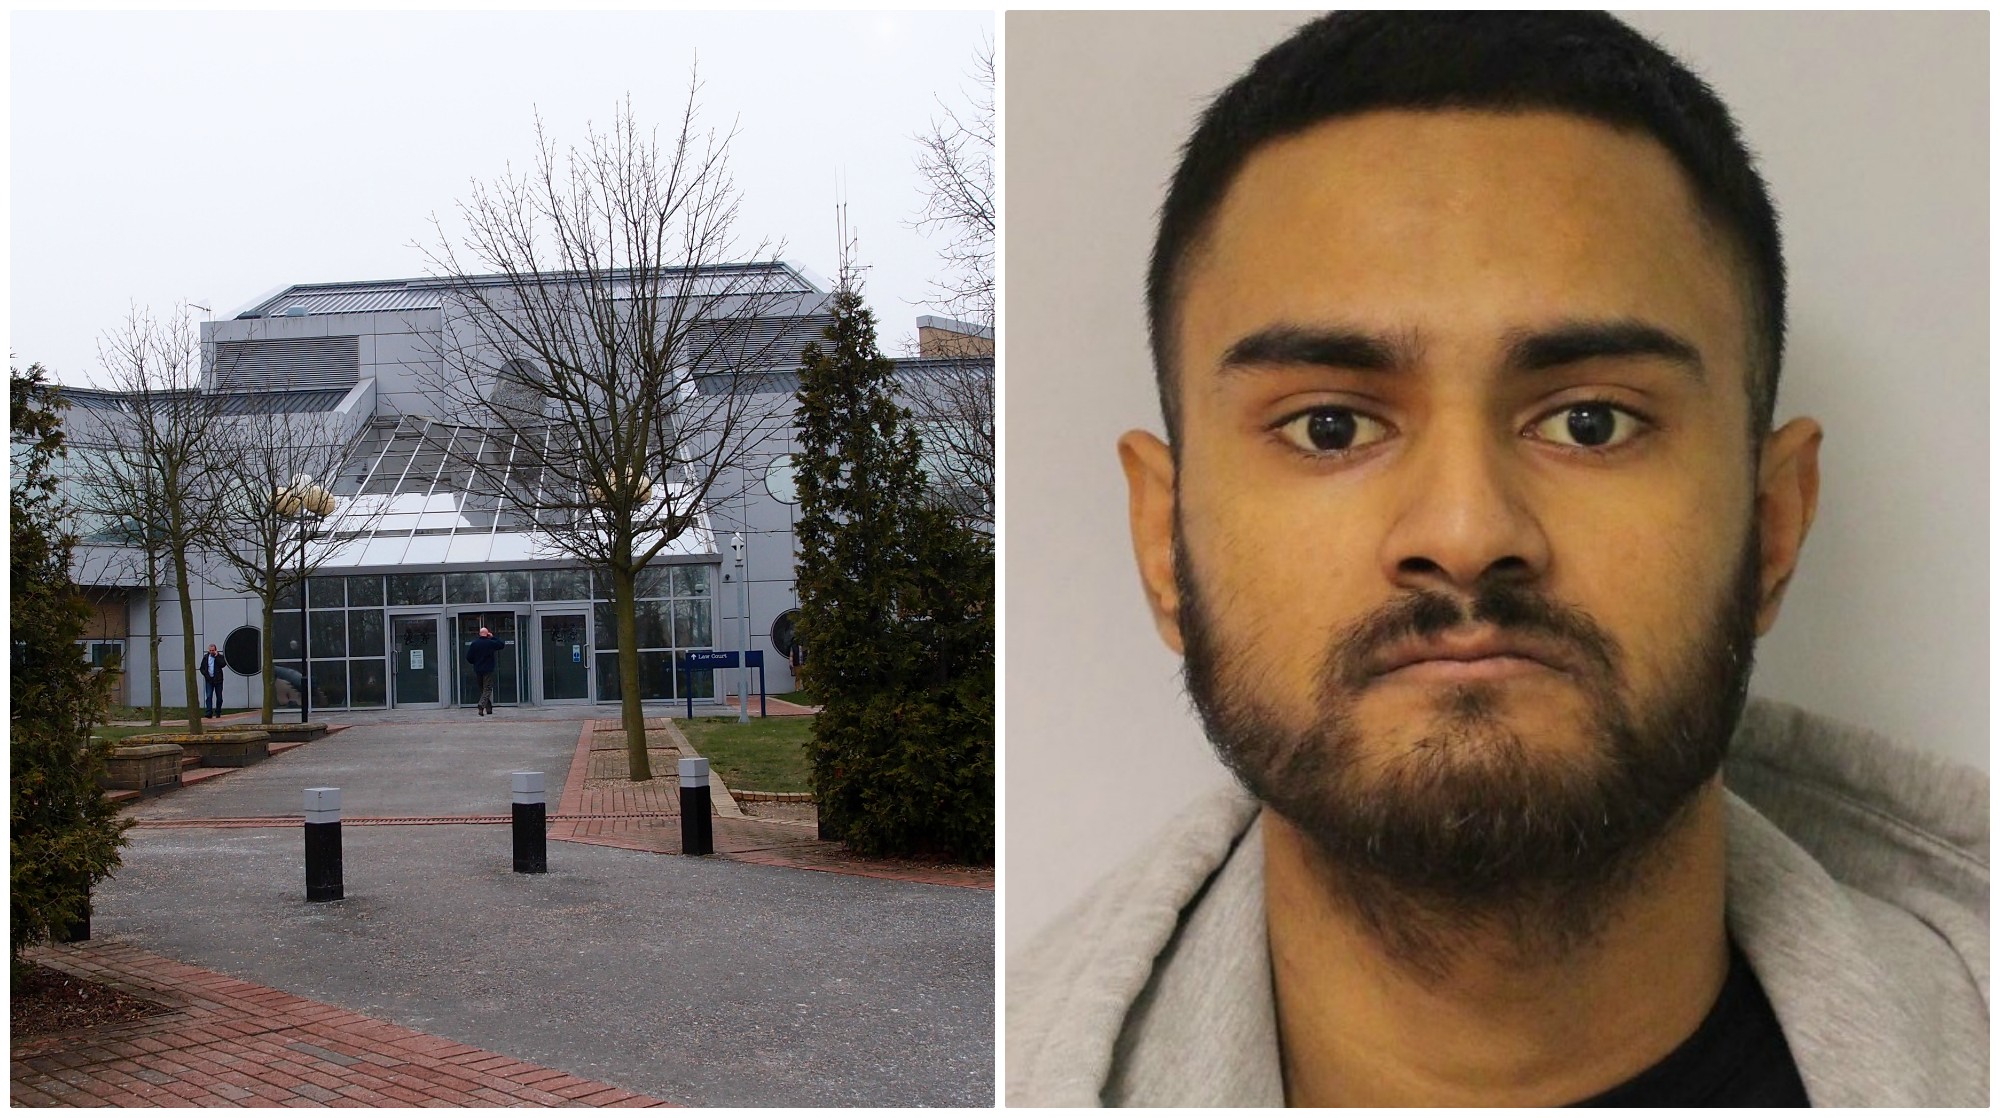 21-year-old Ahad Ali was sentenced at Woolwich Crown Court